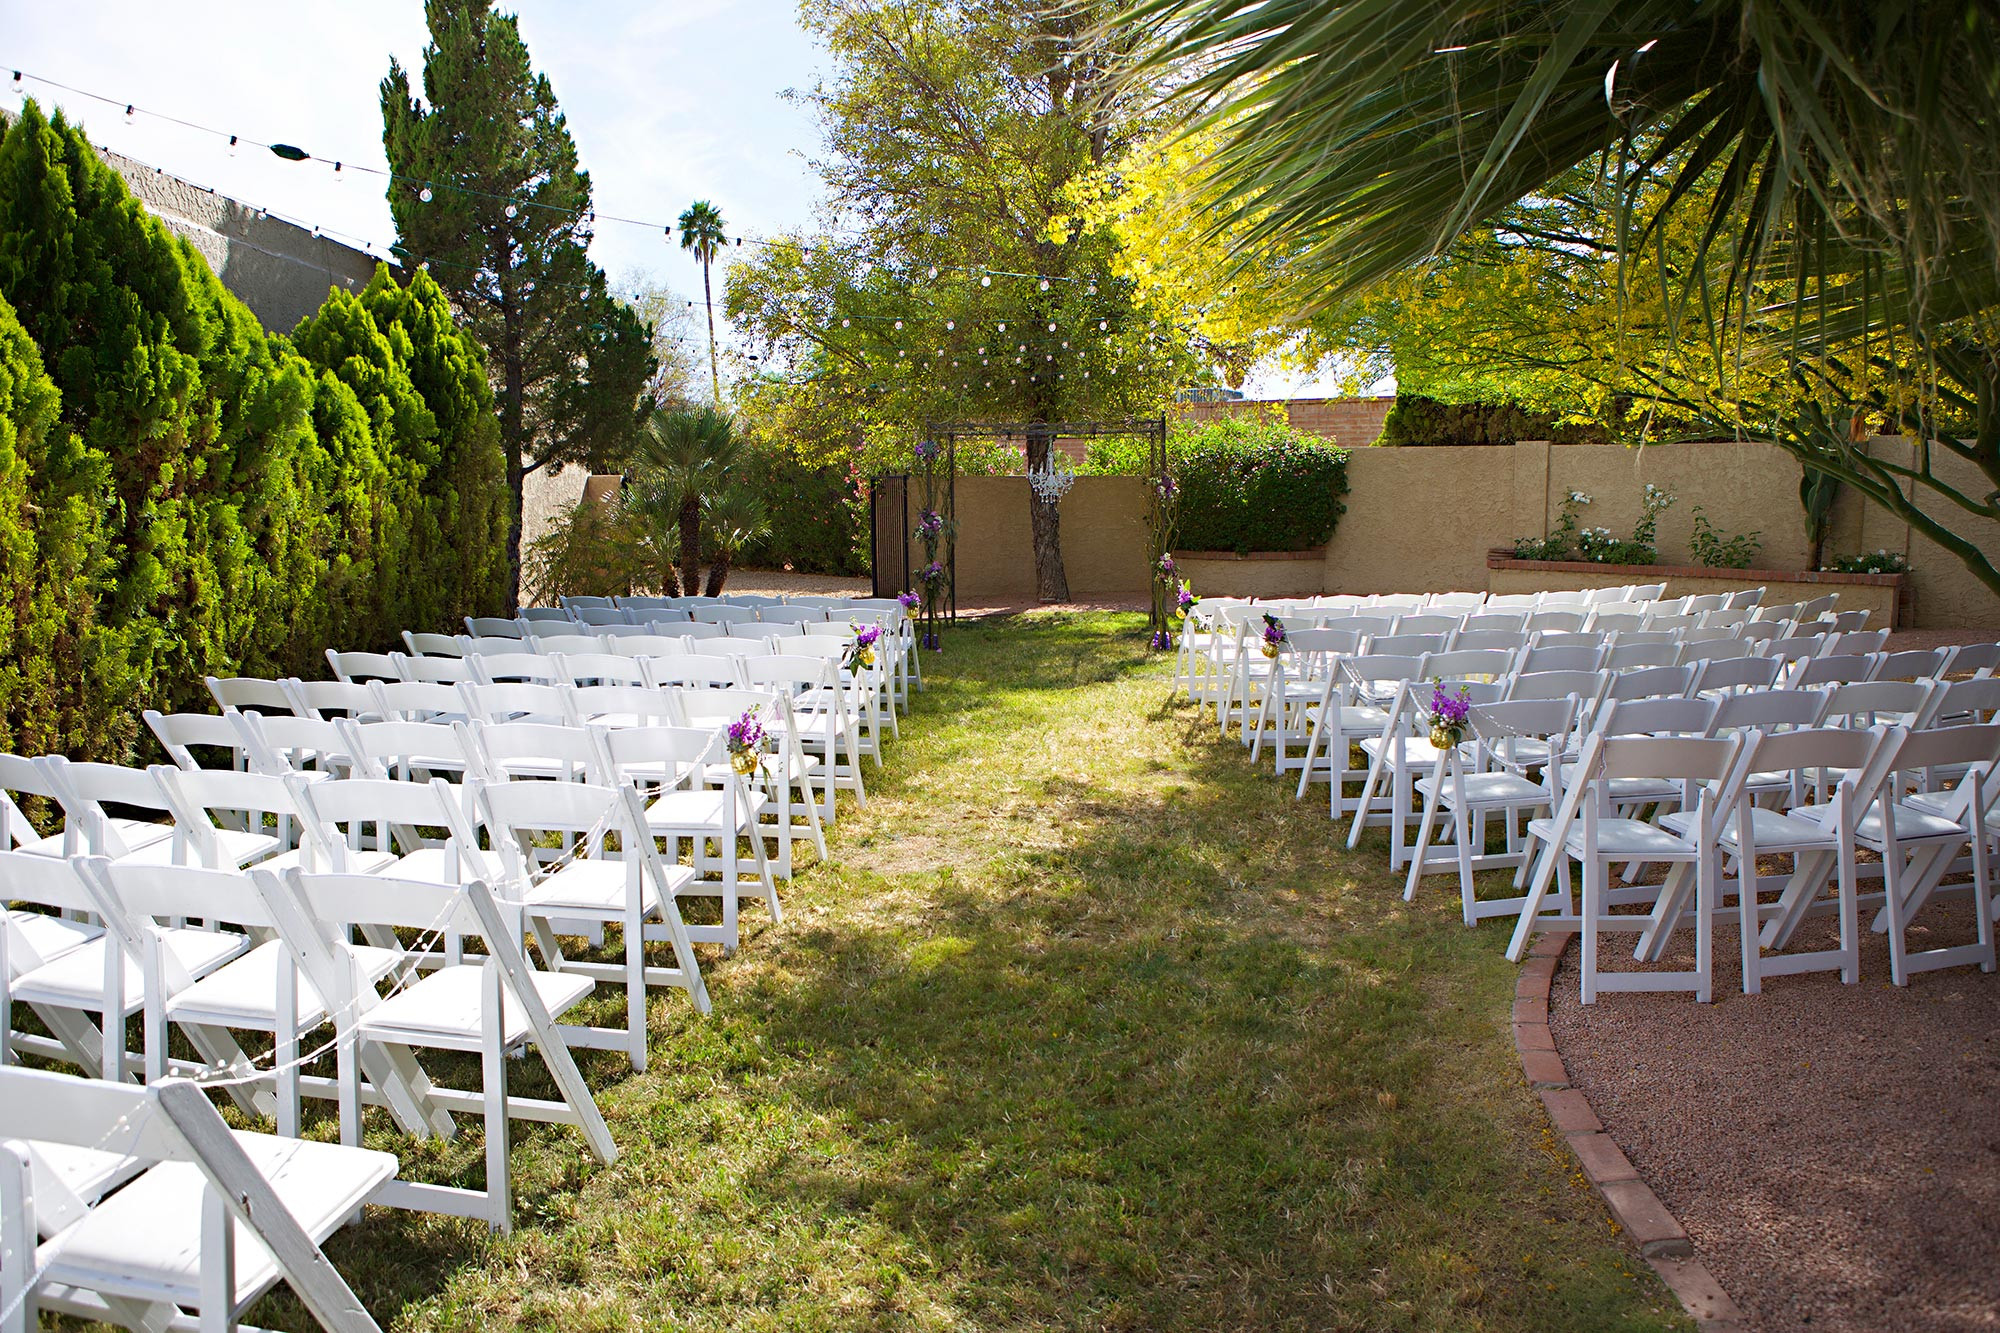 Cheap Wedding Ceremony Decorations
 Top 25 Cheap Wedding Venue Ideas for Ceremony on a Bud